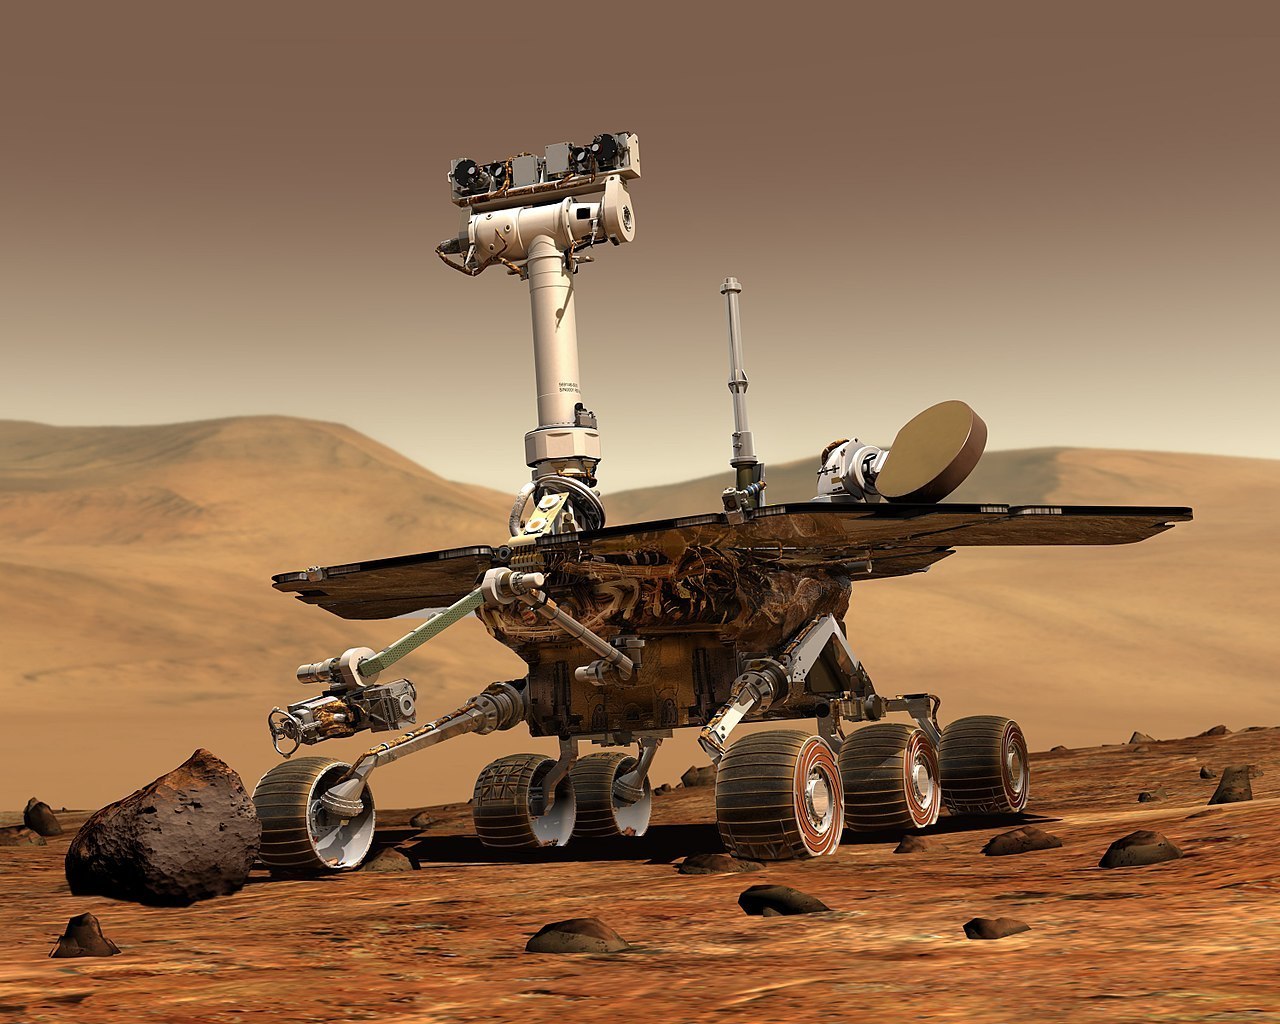 Mars Exploration Rovers: Spirit and Opportunity